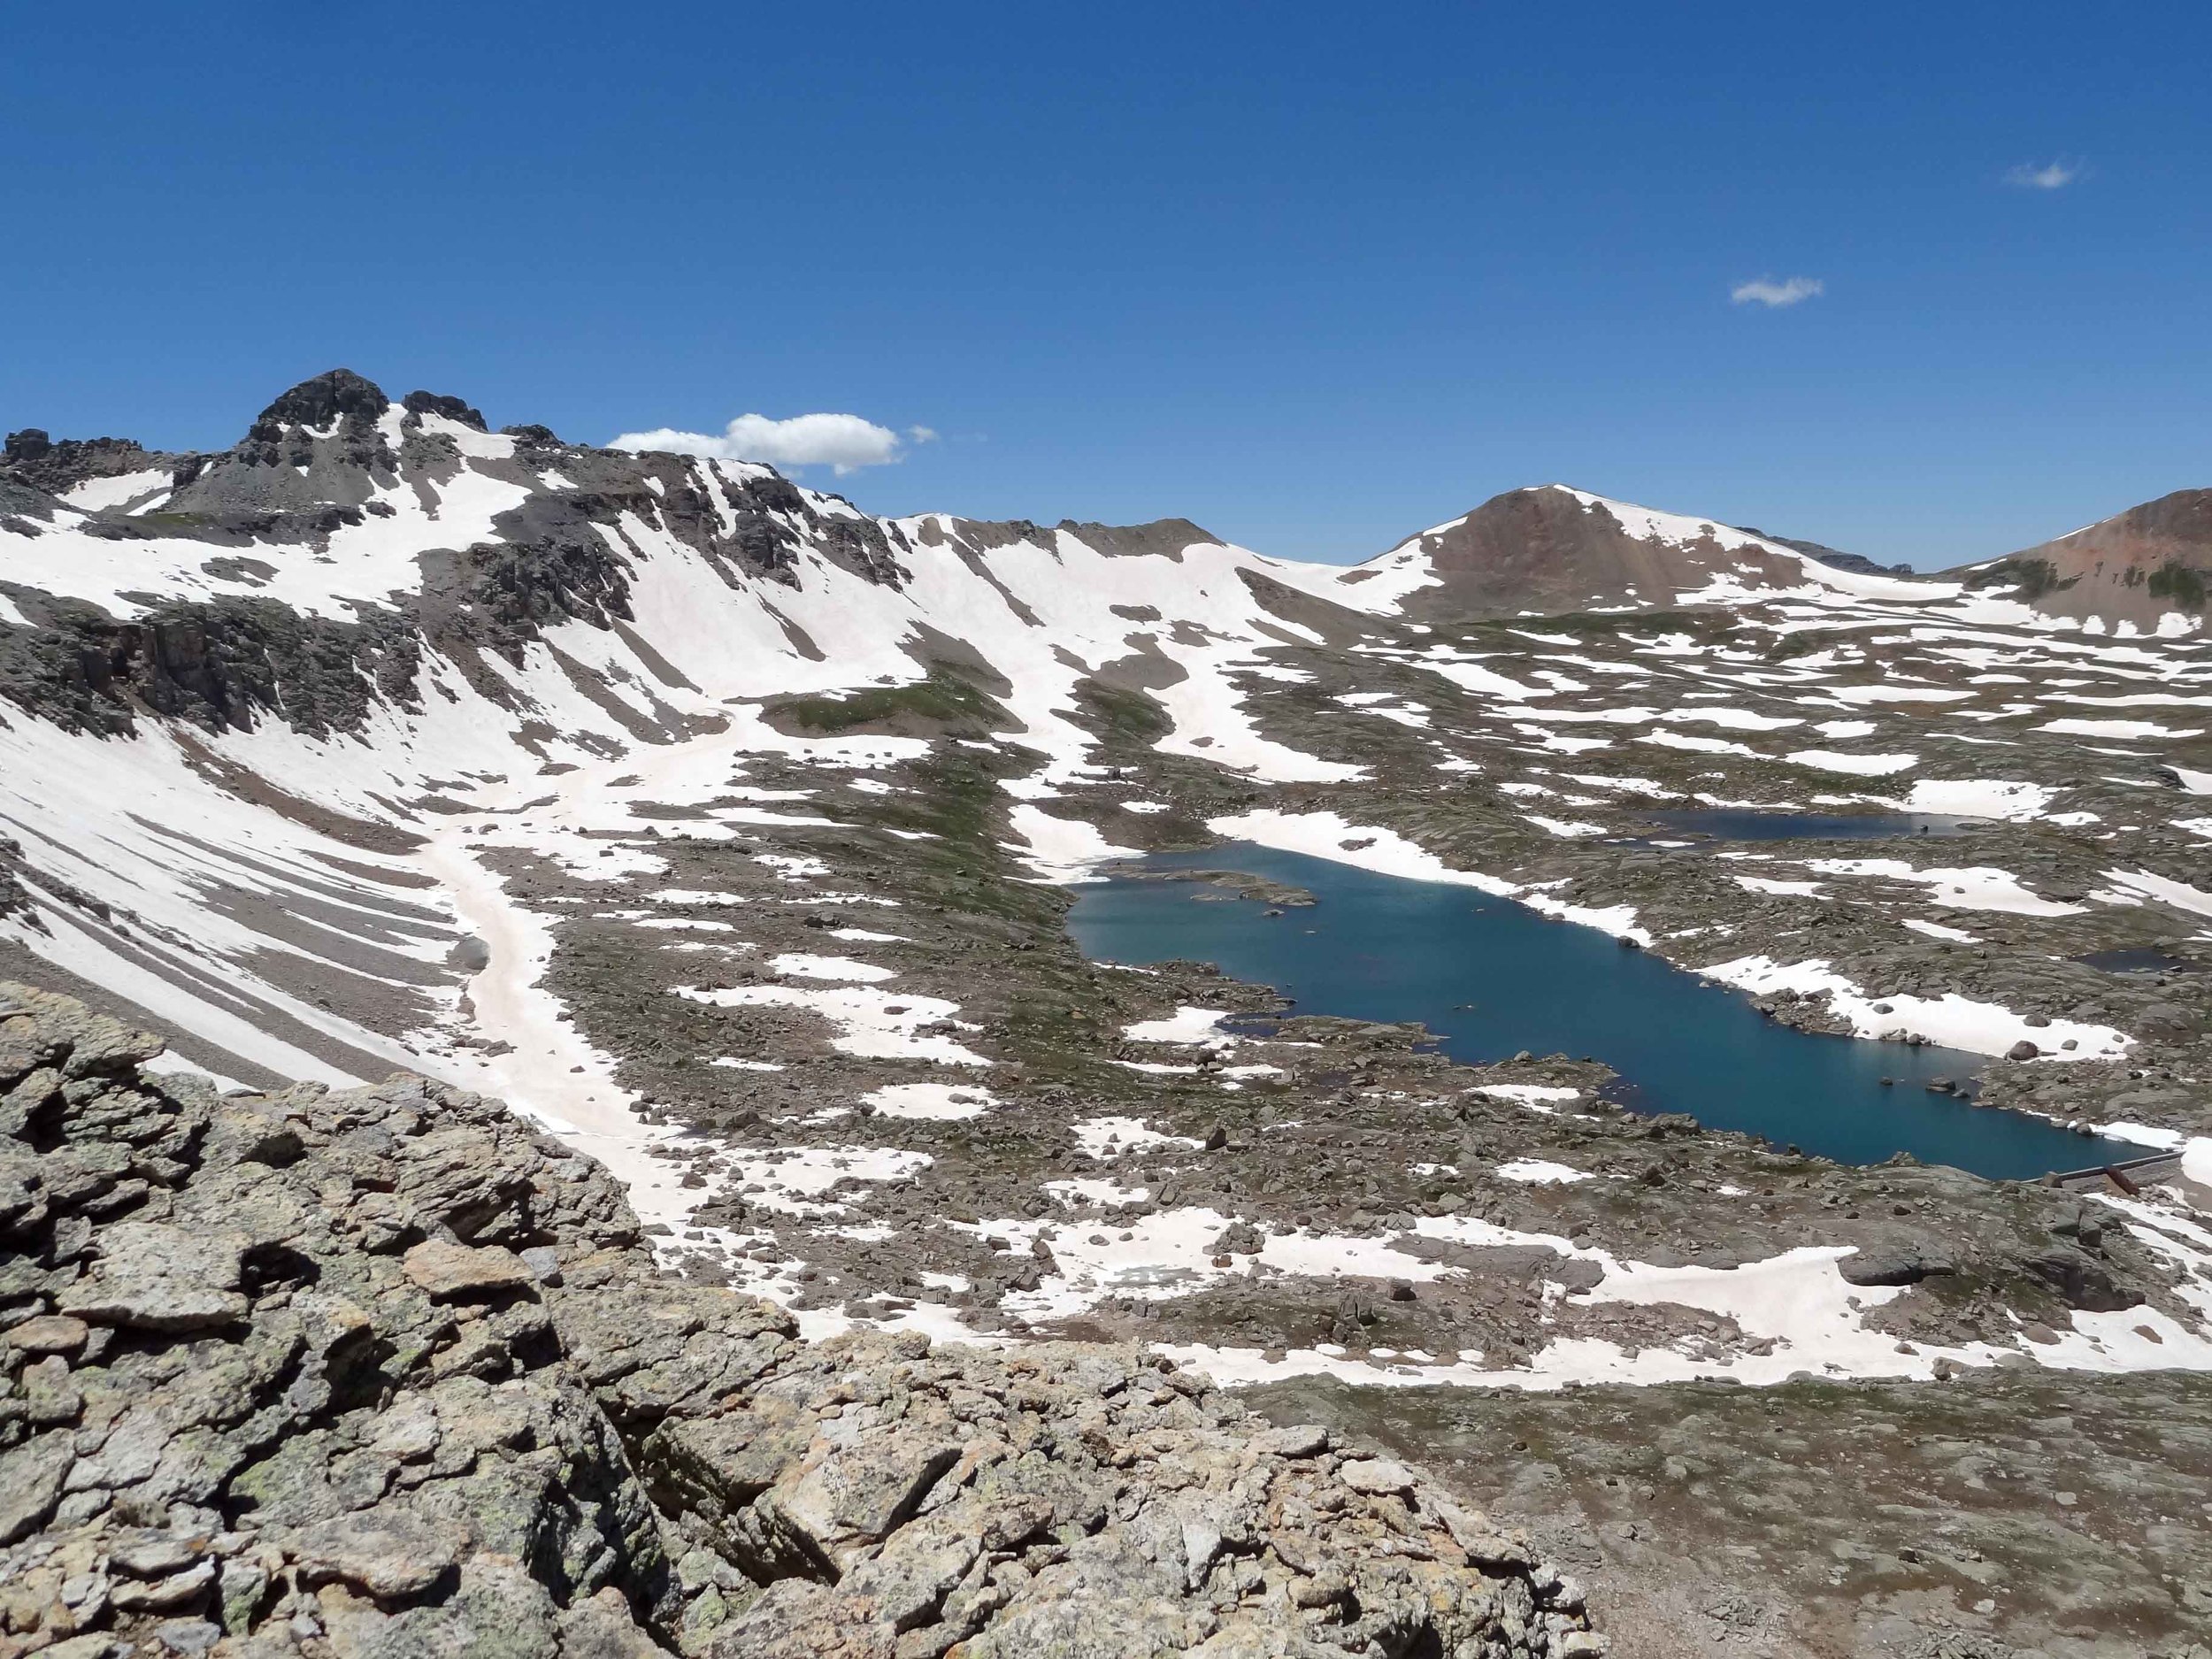 The first view of Lewis Lake from Columbine Pass